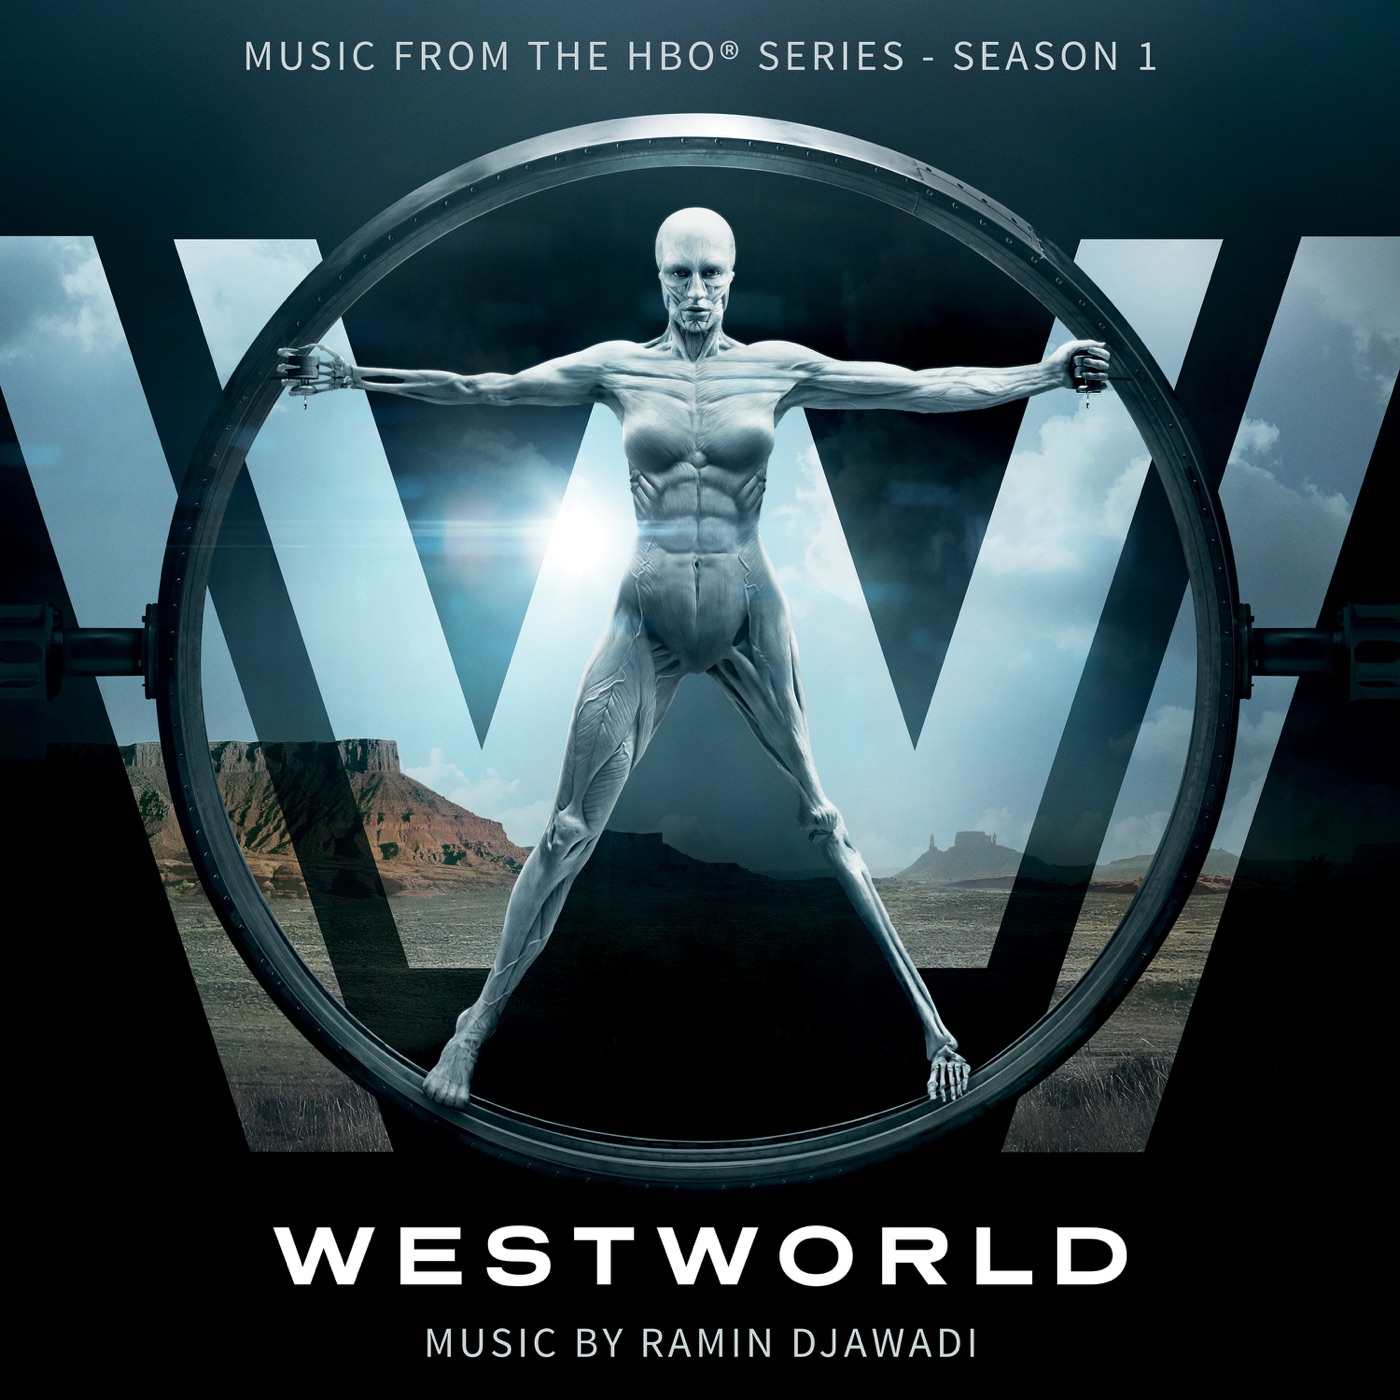 Westworld: Season 1 (Music from the HBO Series) by Ramin Djawadi, Westworld: Season 1 (Music from the HBO Series)